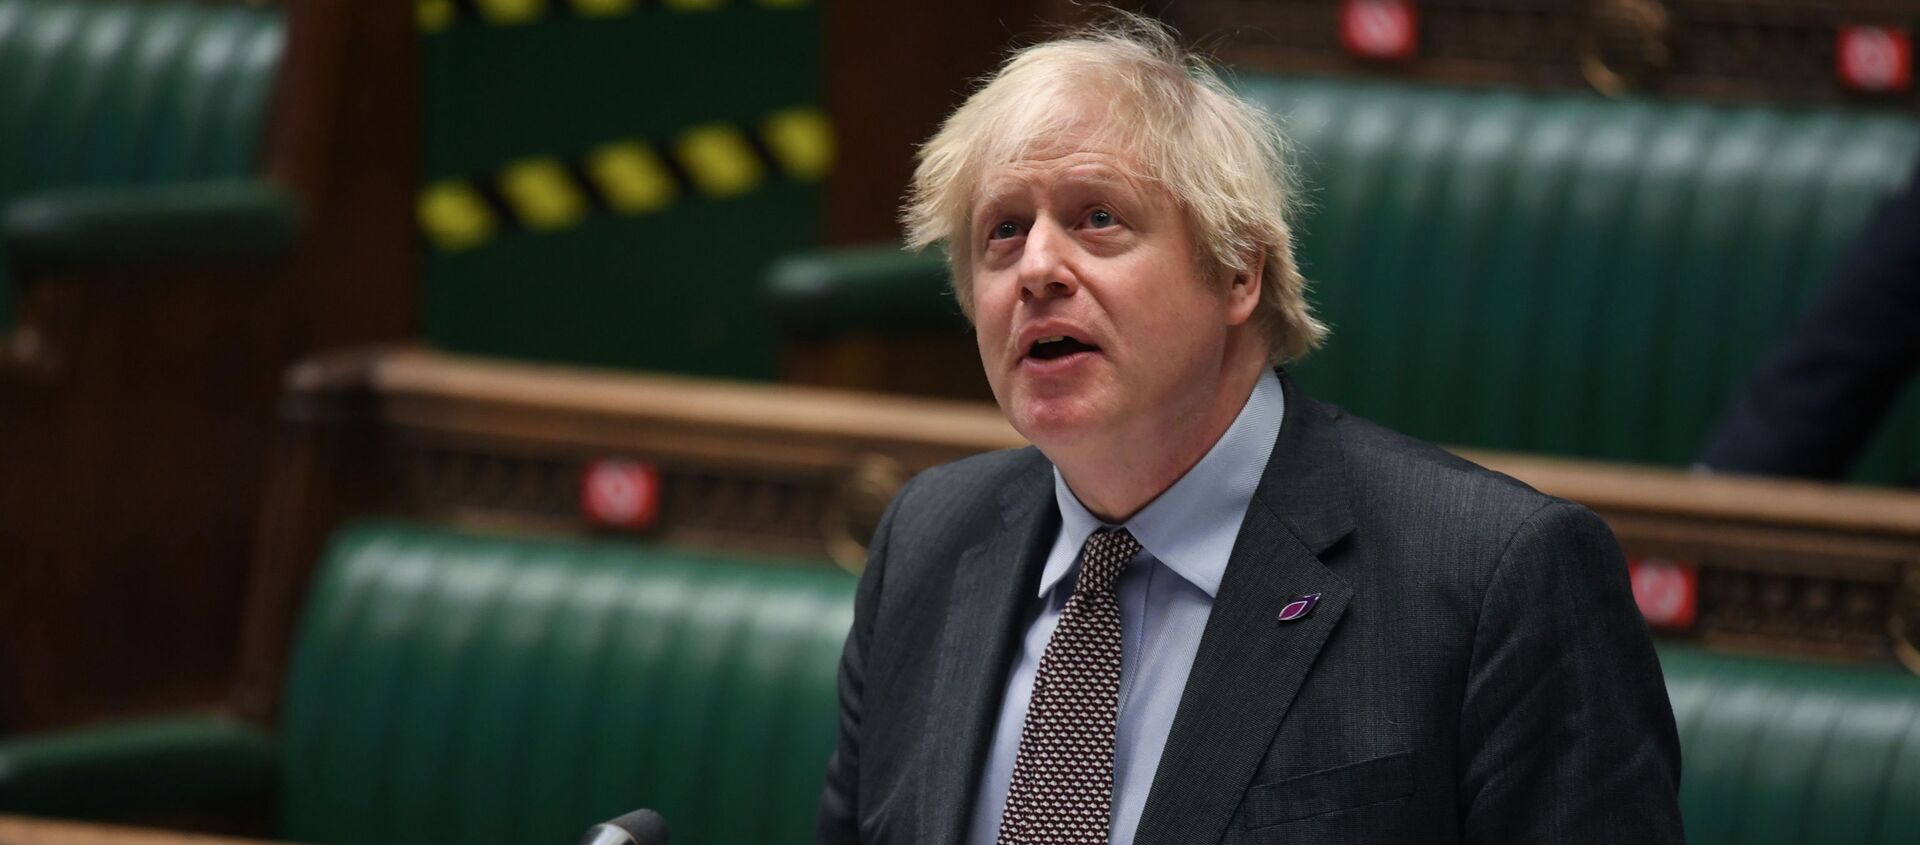 Britain's Prime Minister Boris Johnson speaks during a question period at the House of Commons in London, Britain January 27, 2021 - Sputnik International, 1920, 21.02.2021